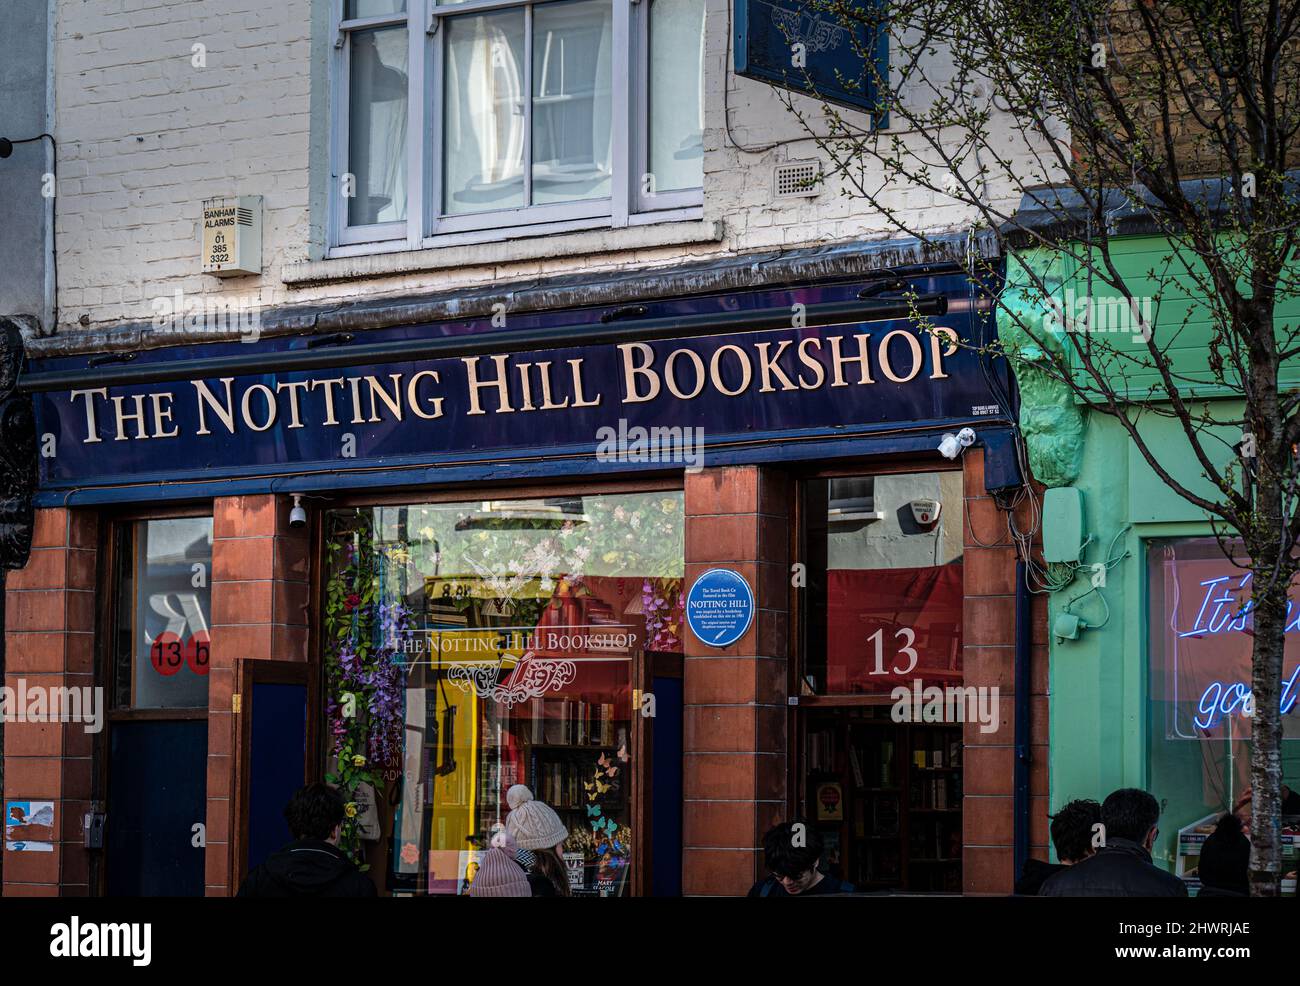 The flat above the Notting Hill bookshop is on sale for £2.4